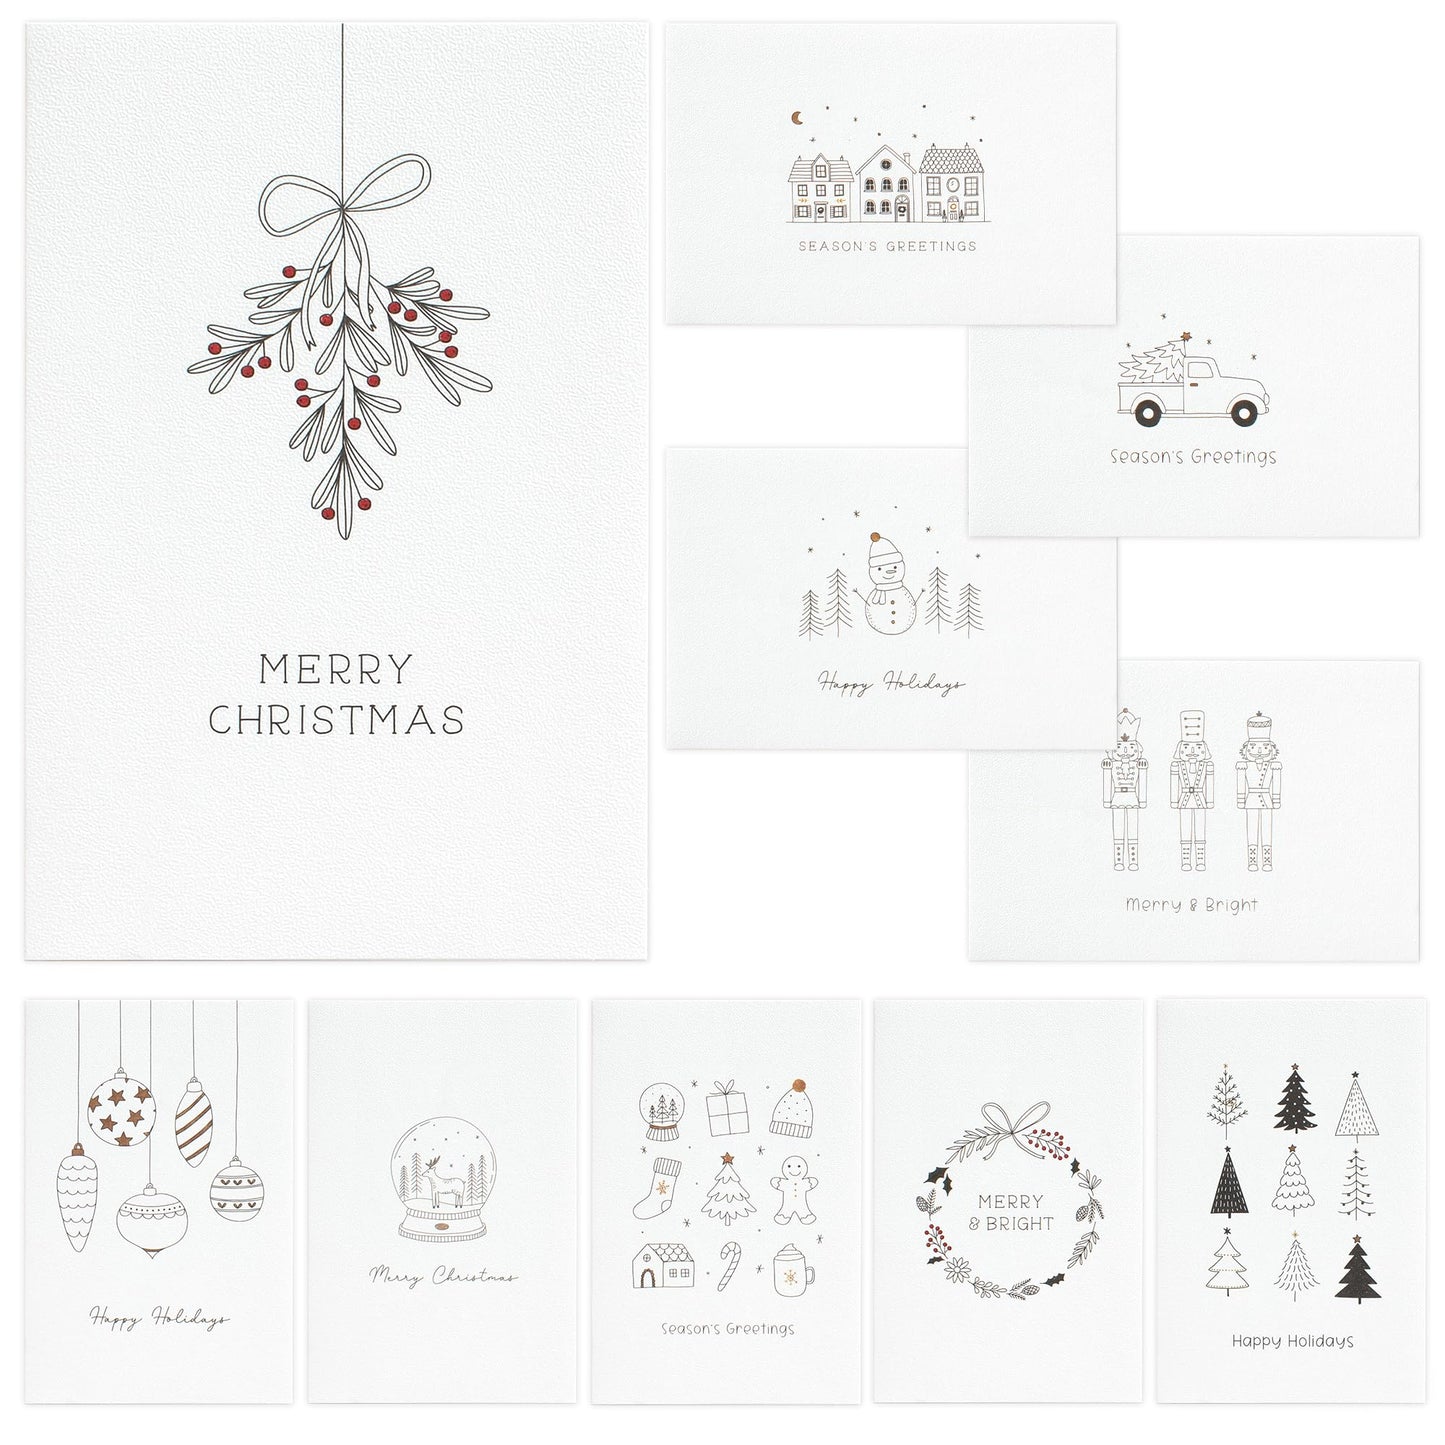 ZICOTO Beautiful Doodle Christmas Cards Set of 20 - Incl. Bulk Envelopes, Matching Stickers And Storage Box - Perfect to Send Warm Holiday Wishes to Friends and Family